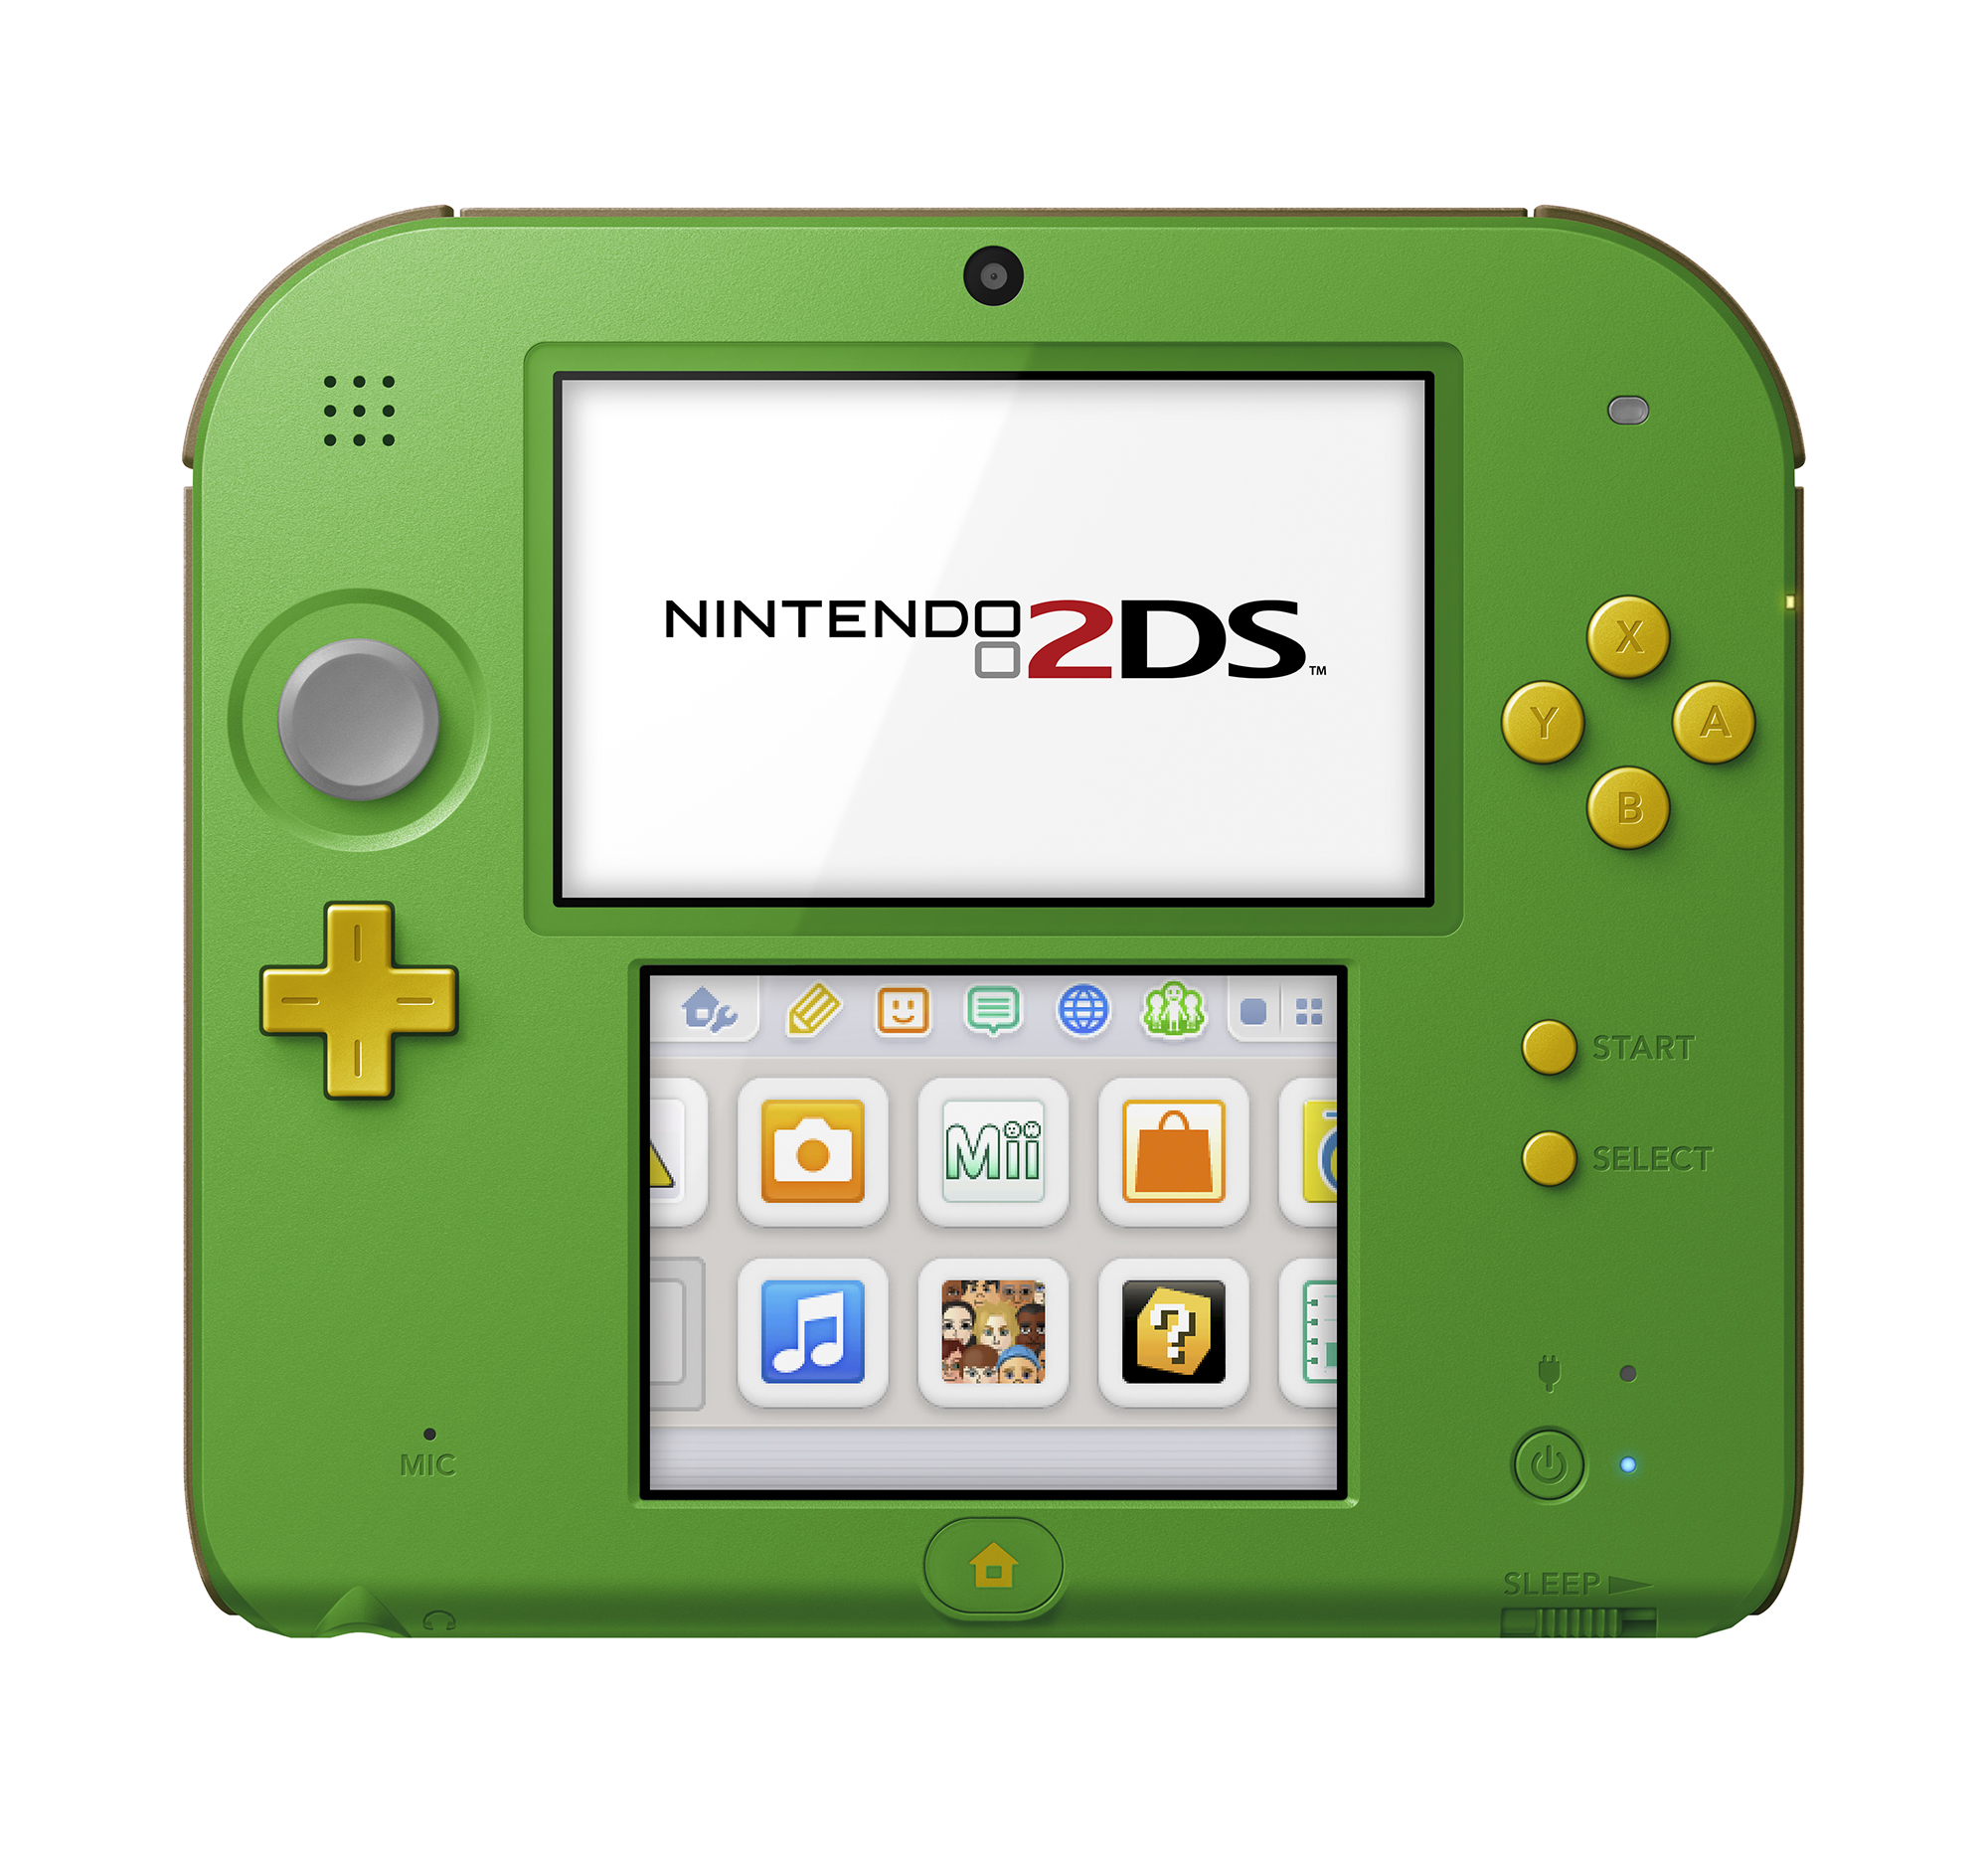 Nintendo 2DS System with The Legend of Zelda: Ocarina of Time 3D - image 1 of 6